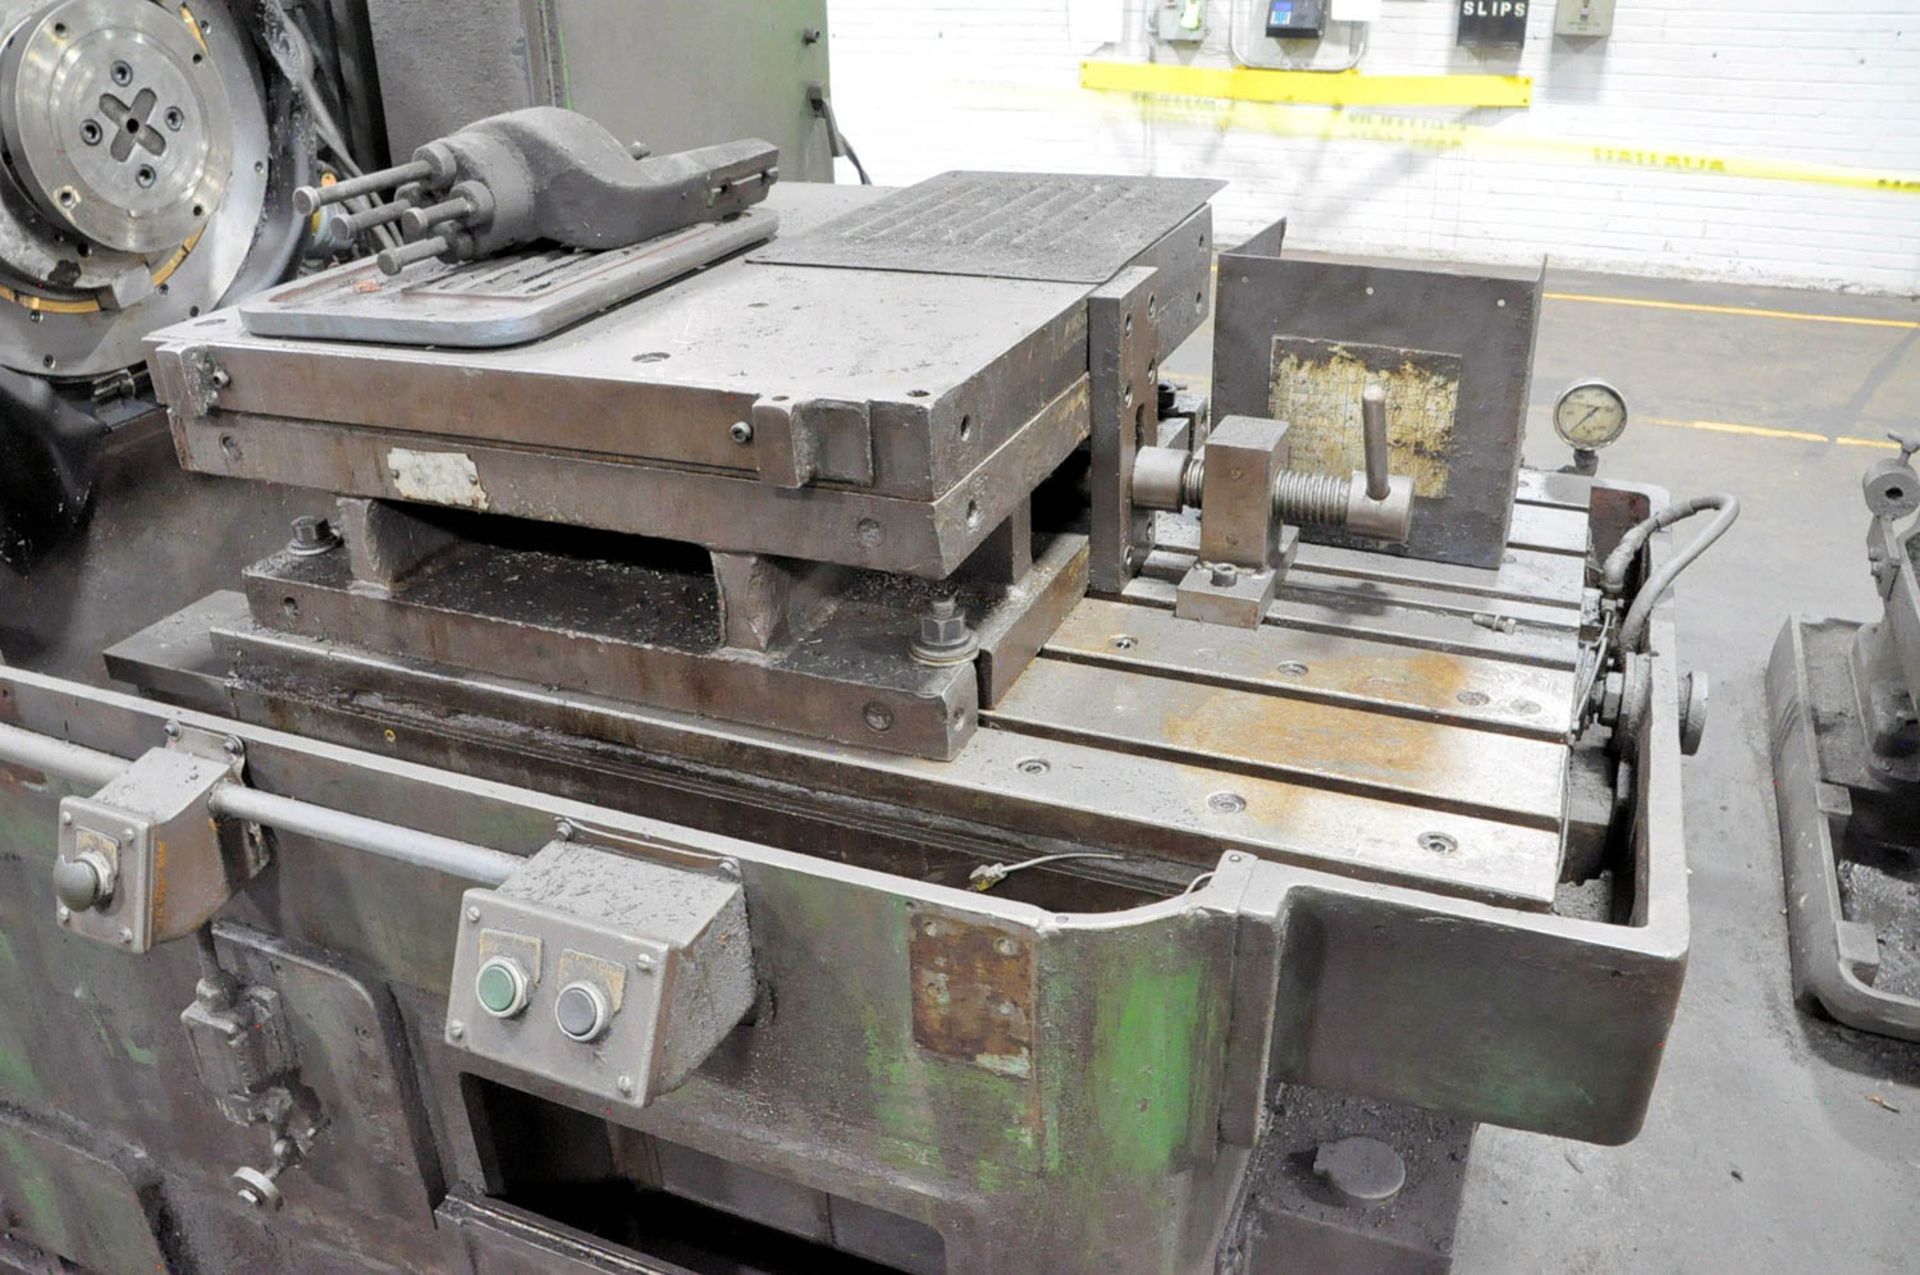 HOOVER FLANGE CUTTING MACHINE, S/N: N/A, 24" X 36" T-SLOTTED WORK SURFACE, PUSH BUTTON CONTROL, (# - Image 2 of 3